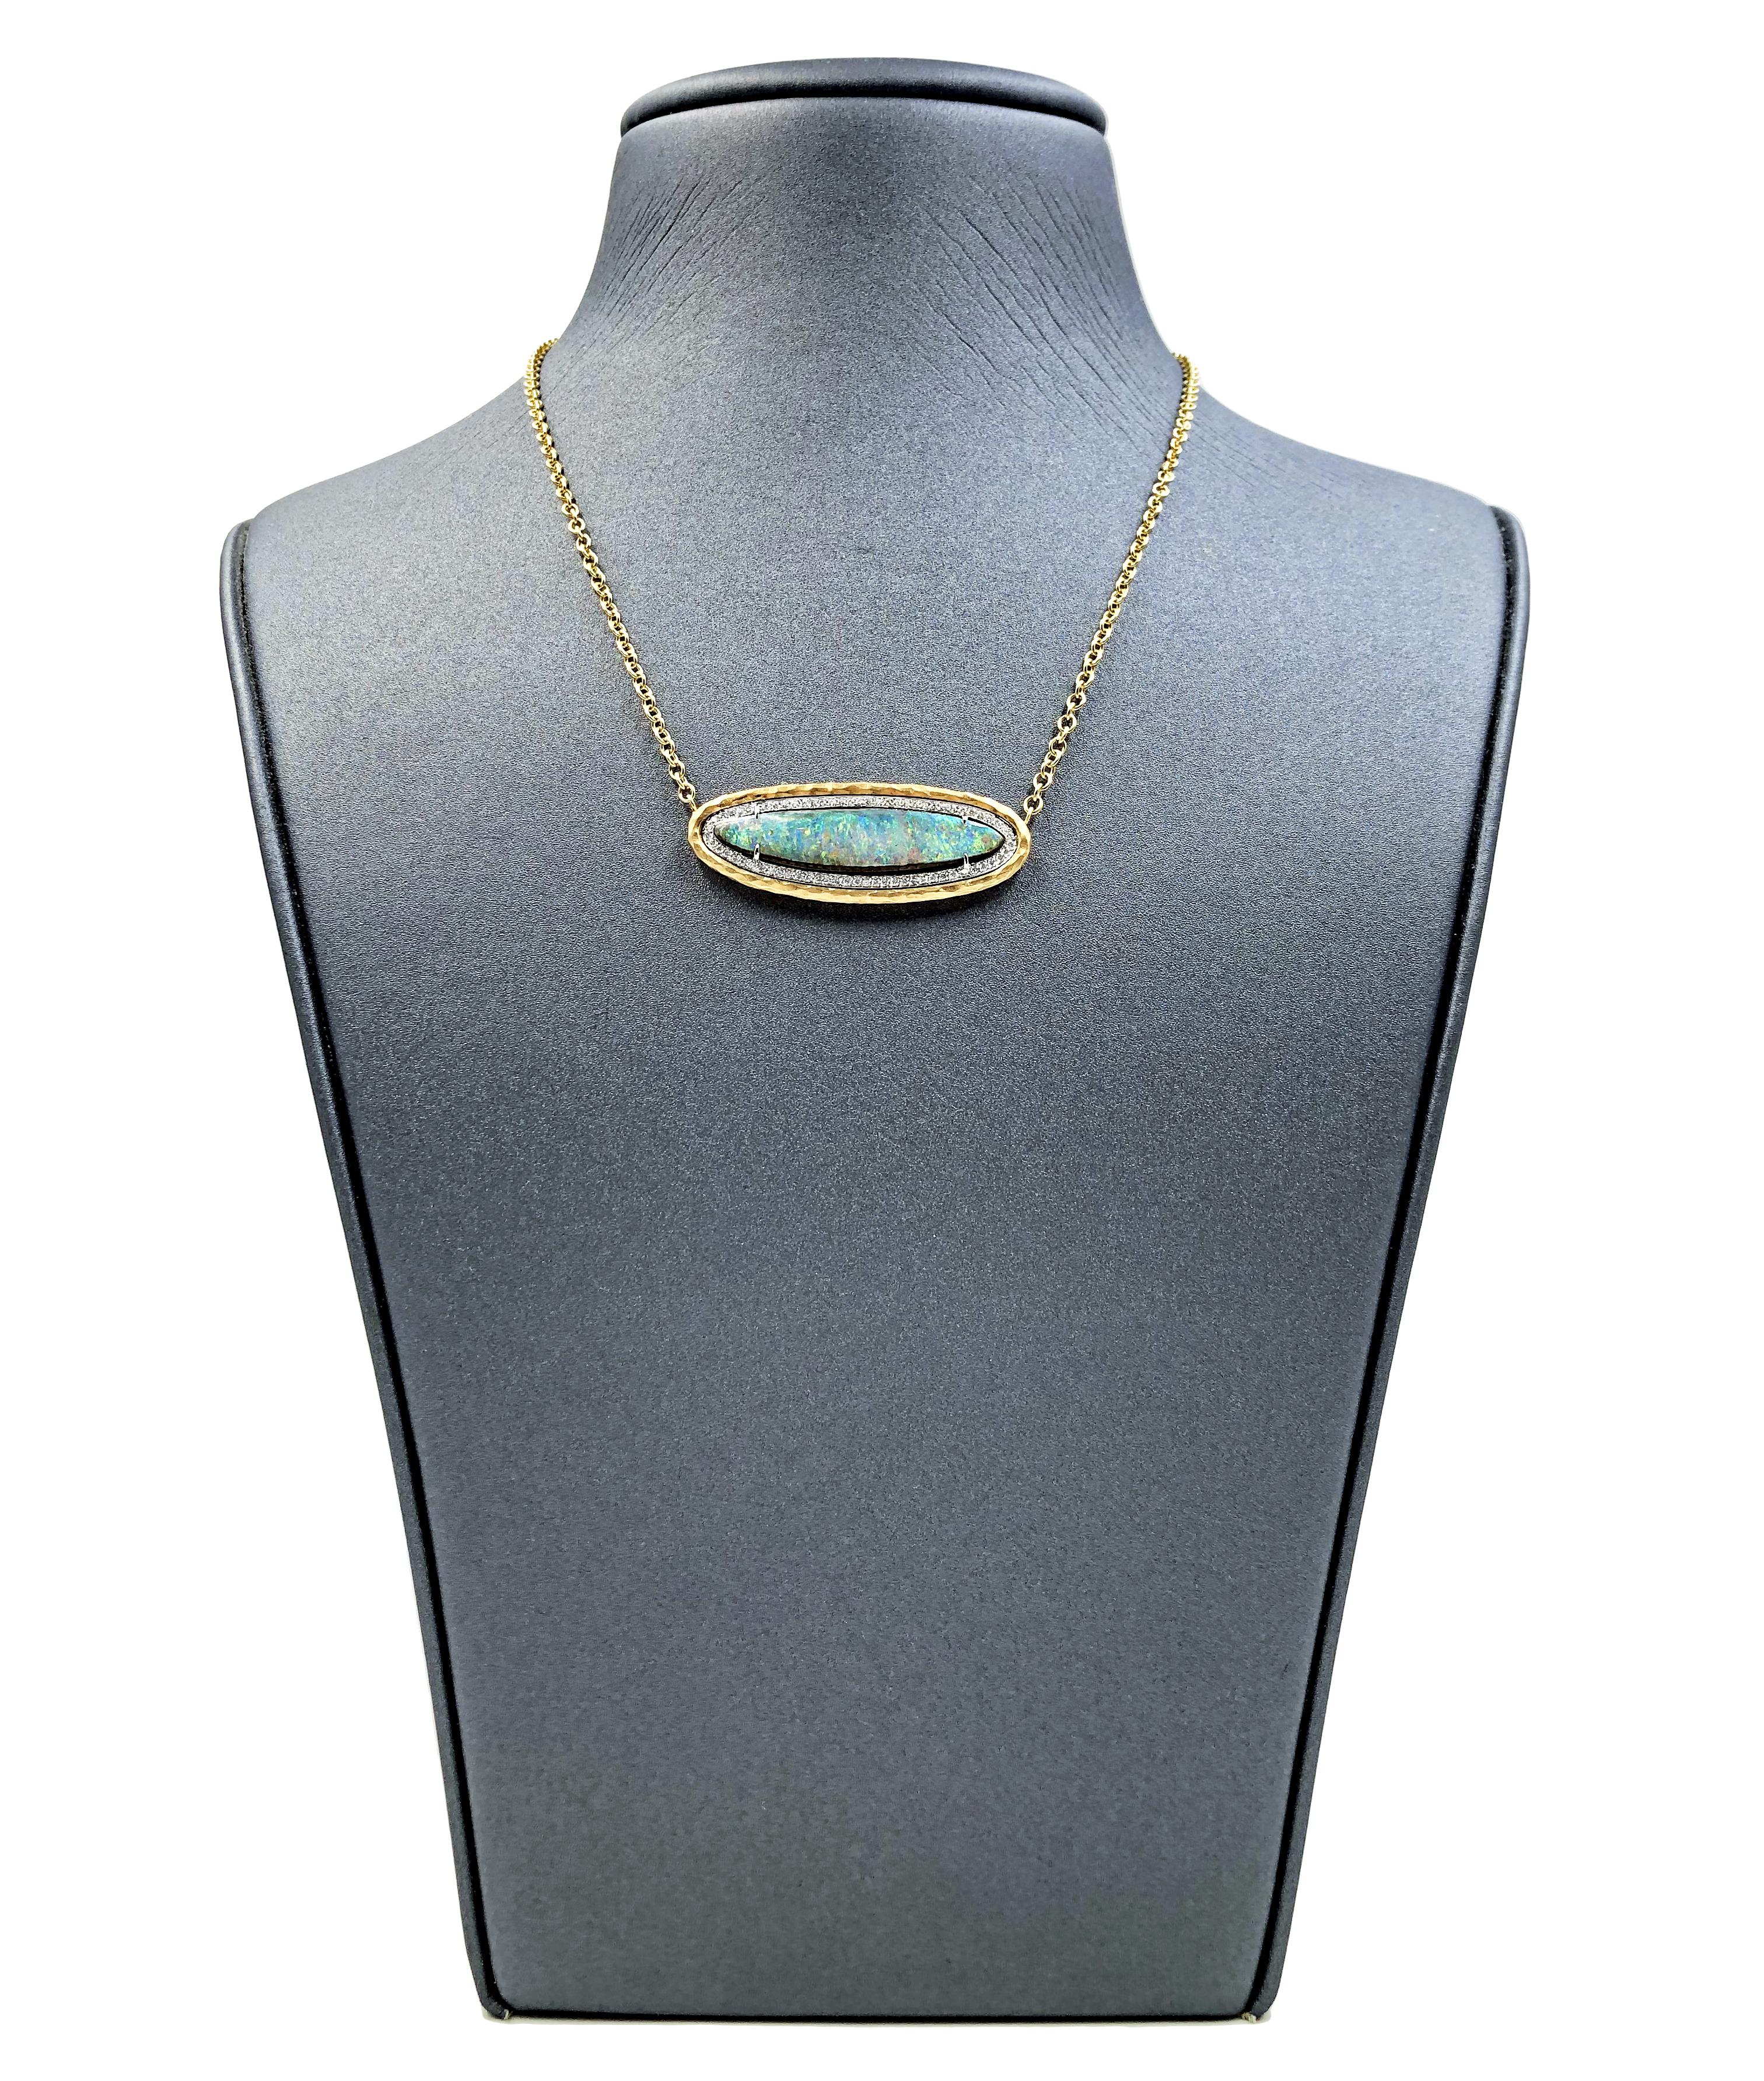 One-of-a-Kind Necklace handcrafted by award-winning jewelry designer Pamela Froman in her signature hammered and matte-finished 18k yellow gold with an exceptional 9.54 carat Australian boulder opal exhibiting vibrant flash and multiple color